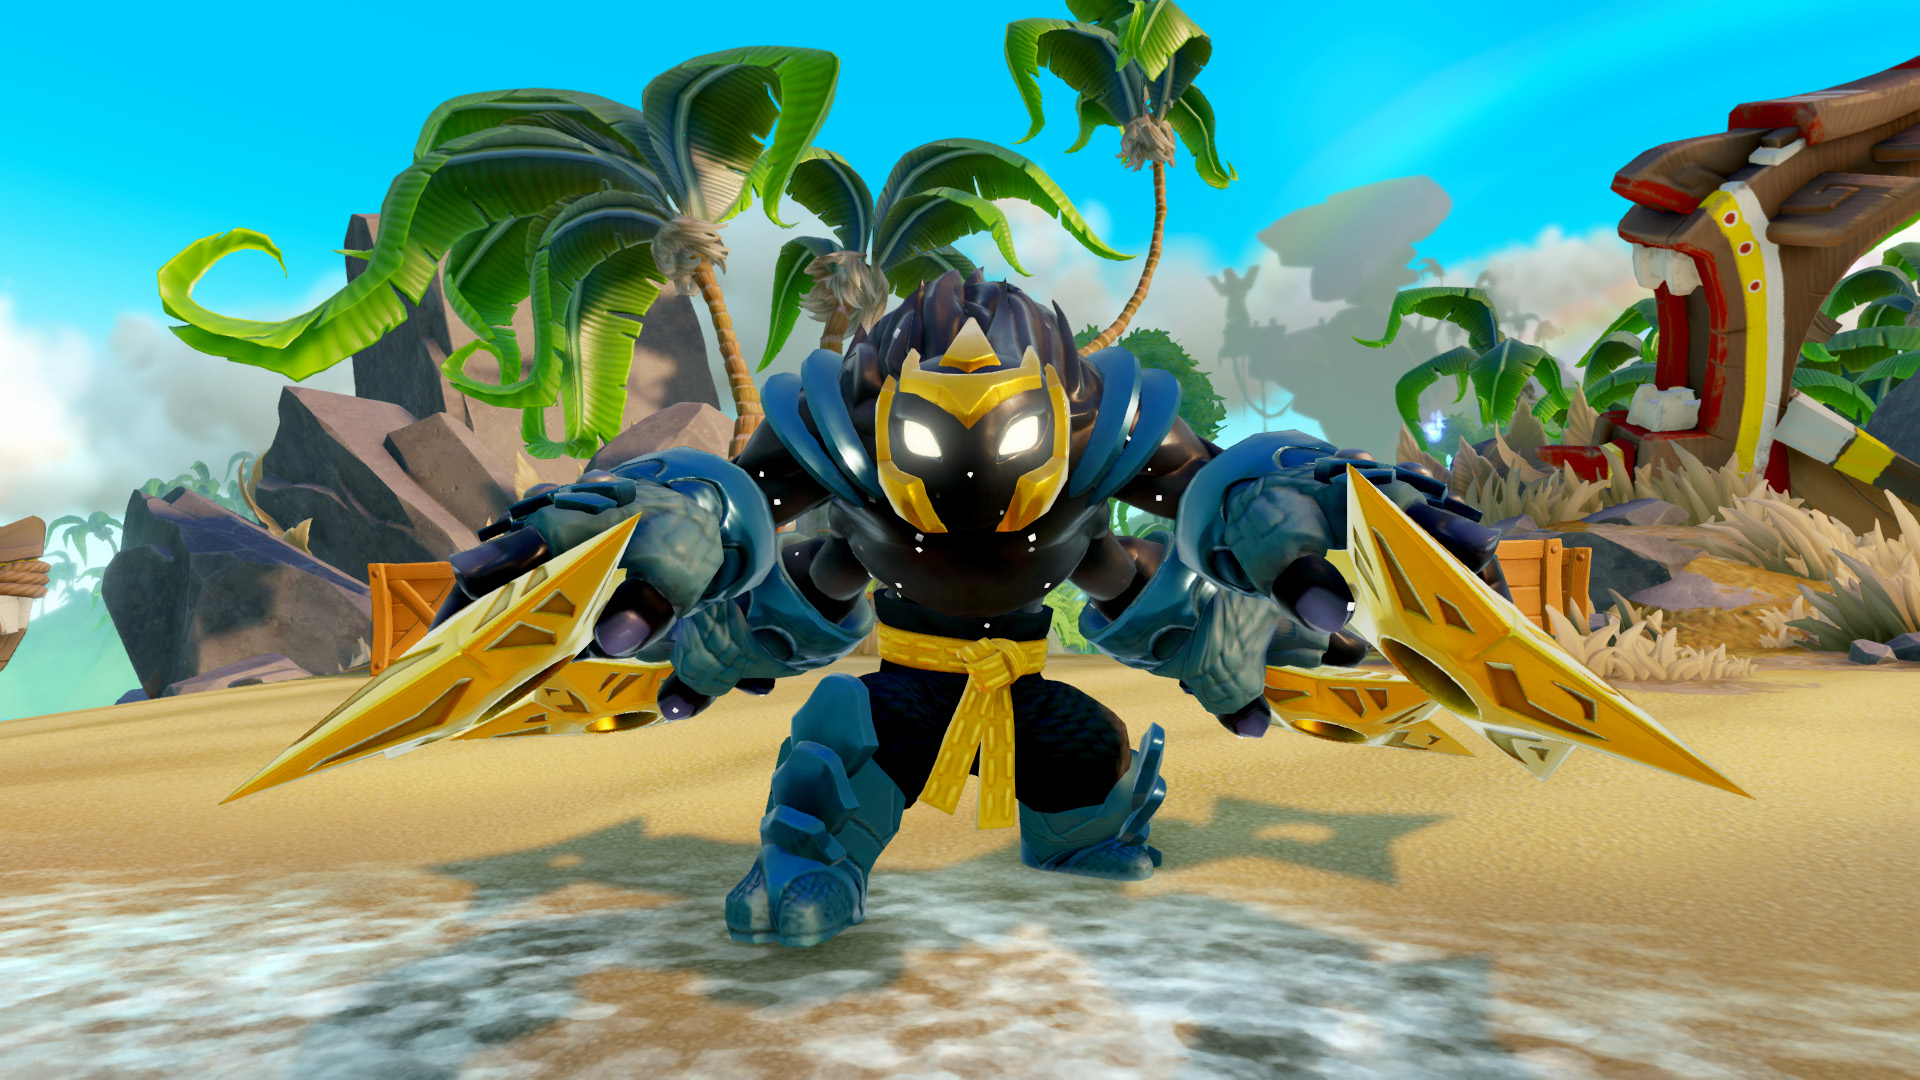 There’s An Entire Level’s Worth Of Crash Bandicoot In The New Skylanders 